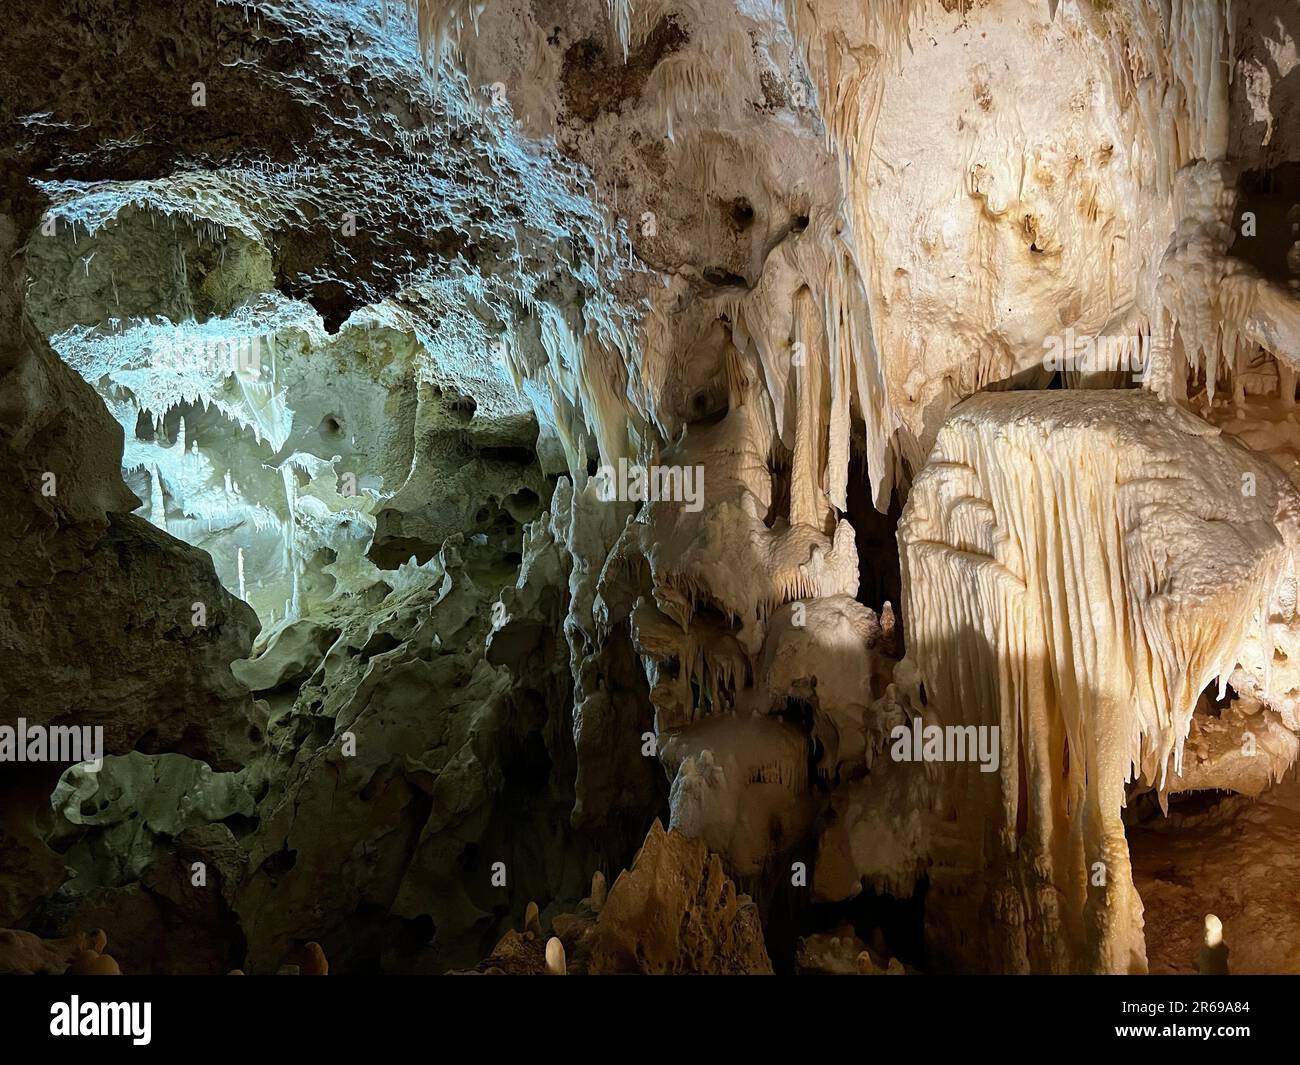 Grotte di Frasassi Karst Cave with Stalactites and Stalagmites in Genga, Marche, Italy. Limestone Formations, Natural Beauty Landscape Stock Photo